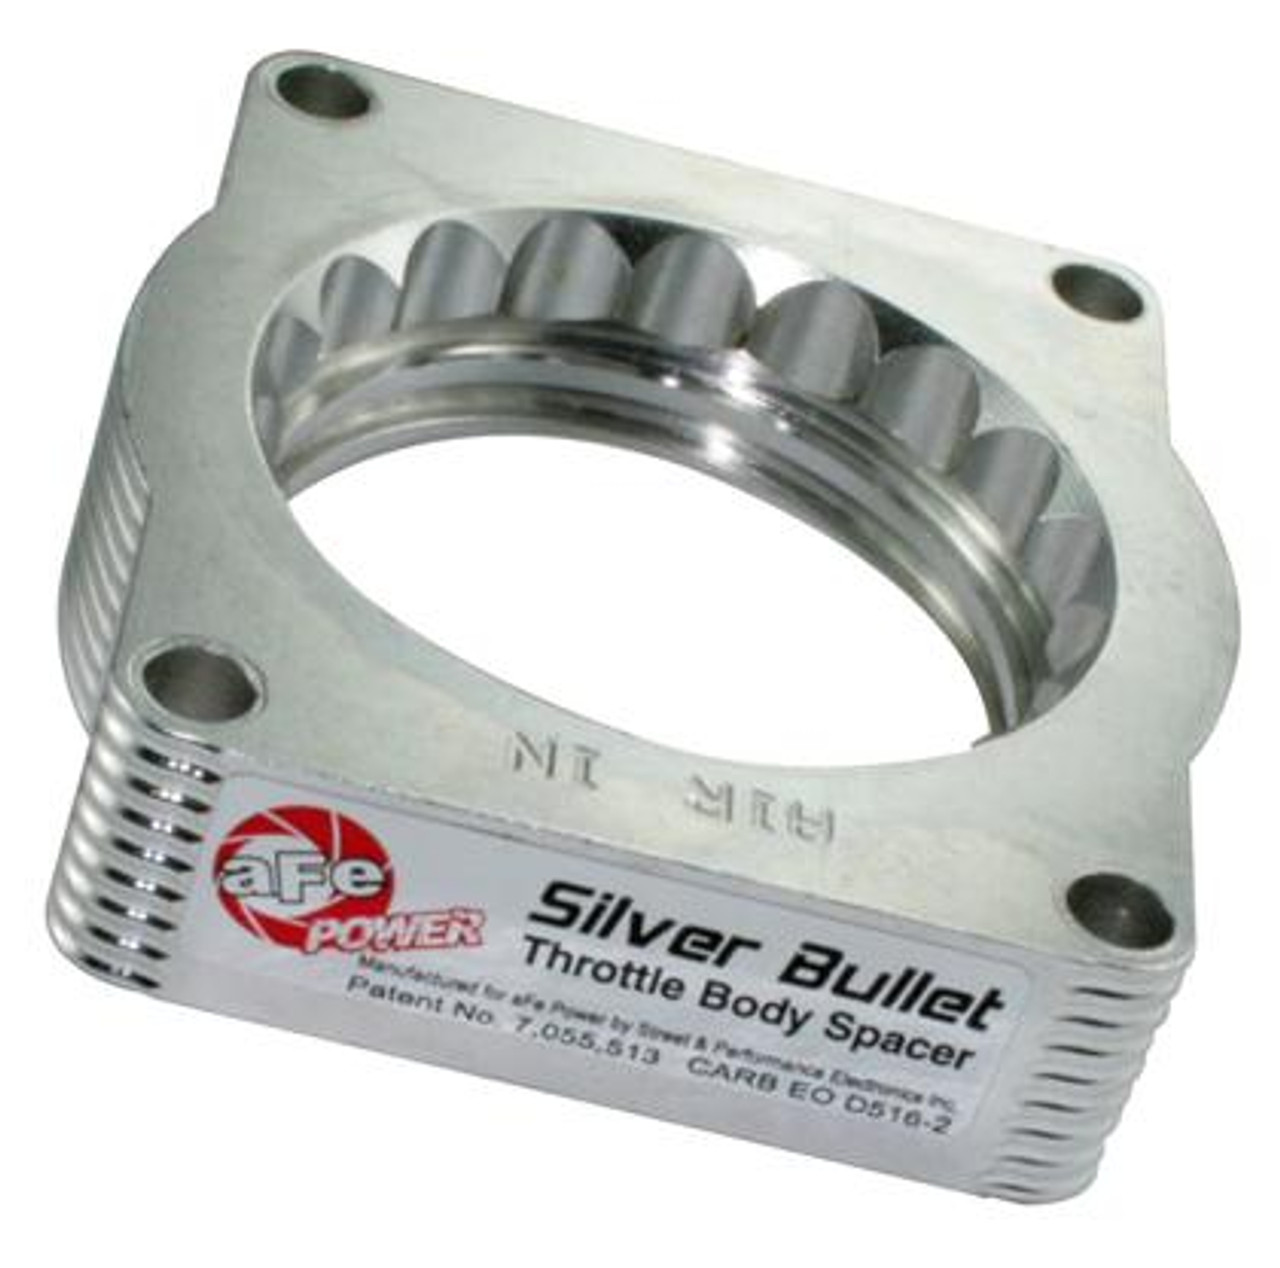 BMW Silver Bullet Throttle Body Spacer - aFe POWER 46-31002